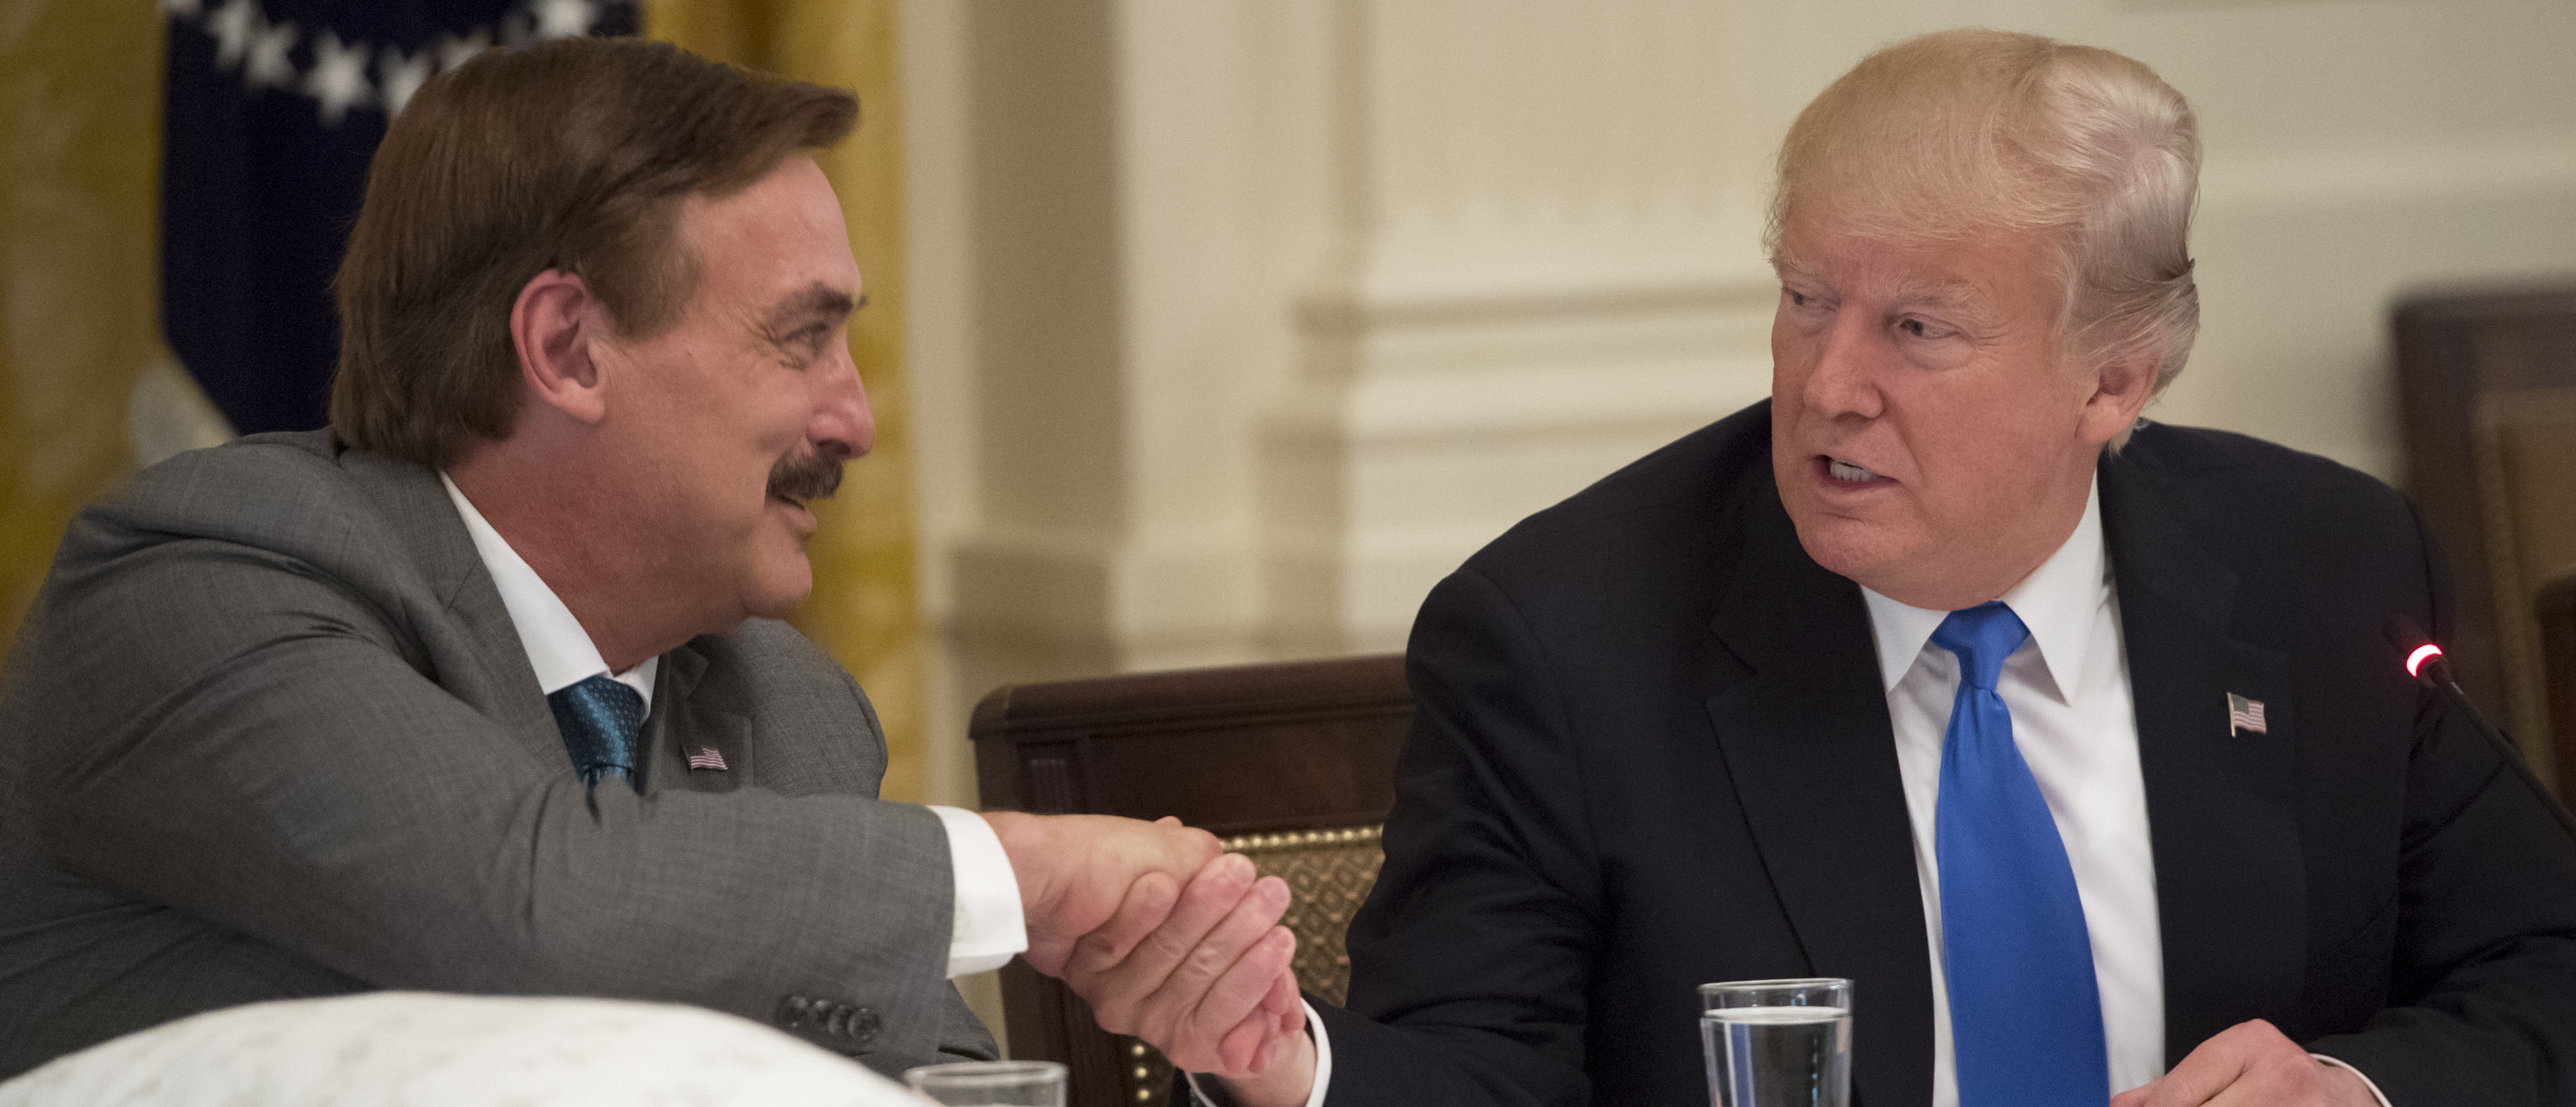 US President Donald Trump shakes hands with Mike Lindell (L), founder of My Pillow, during a Made in America event with US manufacturers in the East Room of the White House in Washington, DC, July 19, 2017. / AFP PHOTO / SAUL LOEB (Photo credit should read SAUL LOEB/AFP/Getty Images)